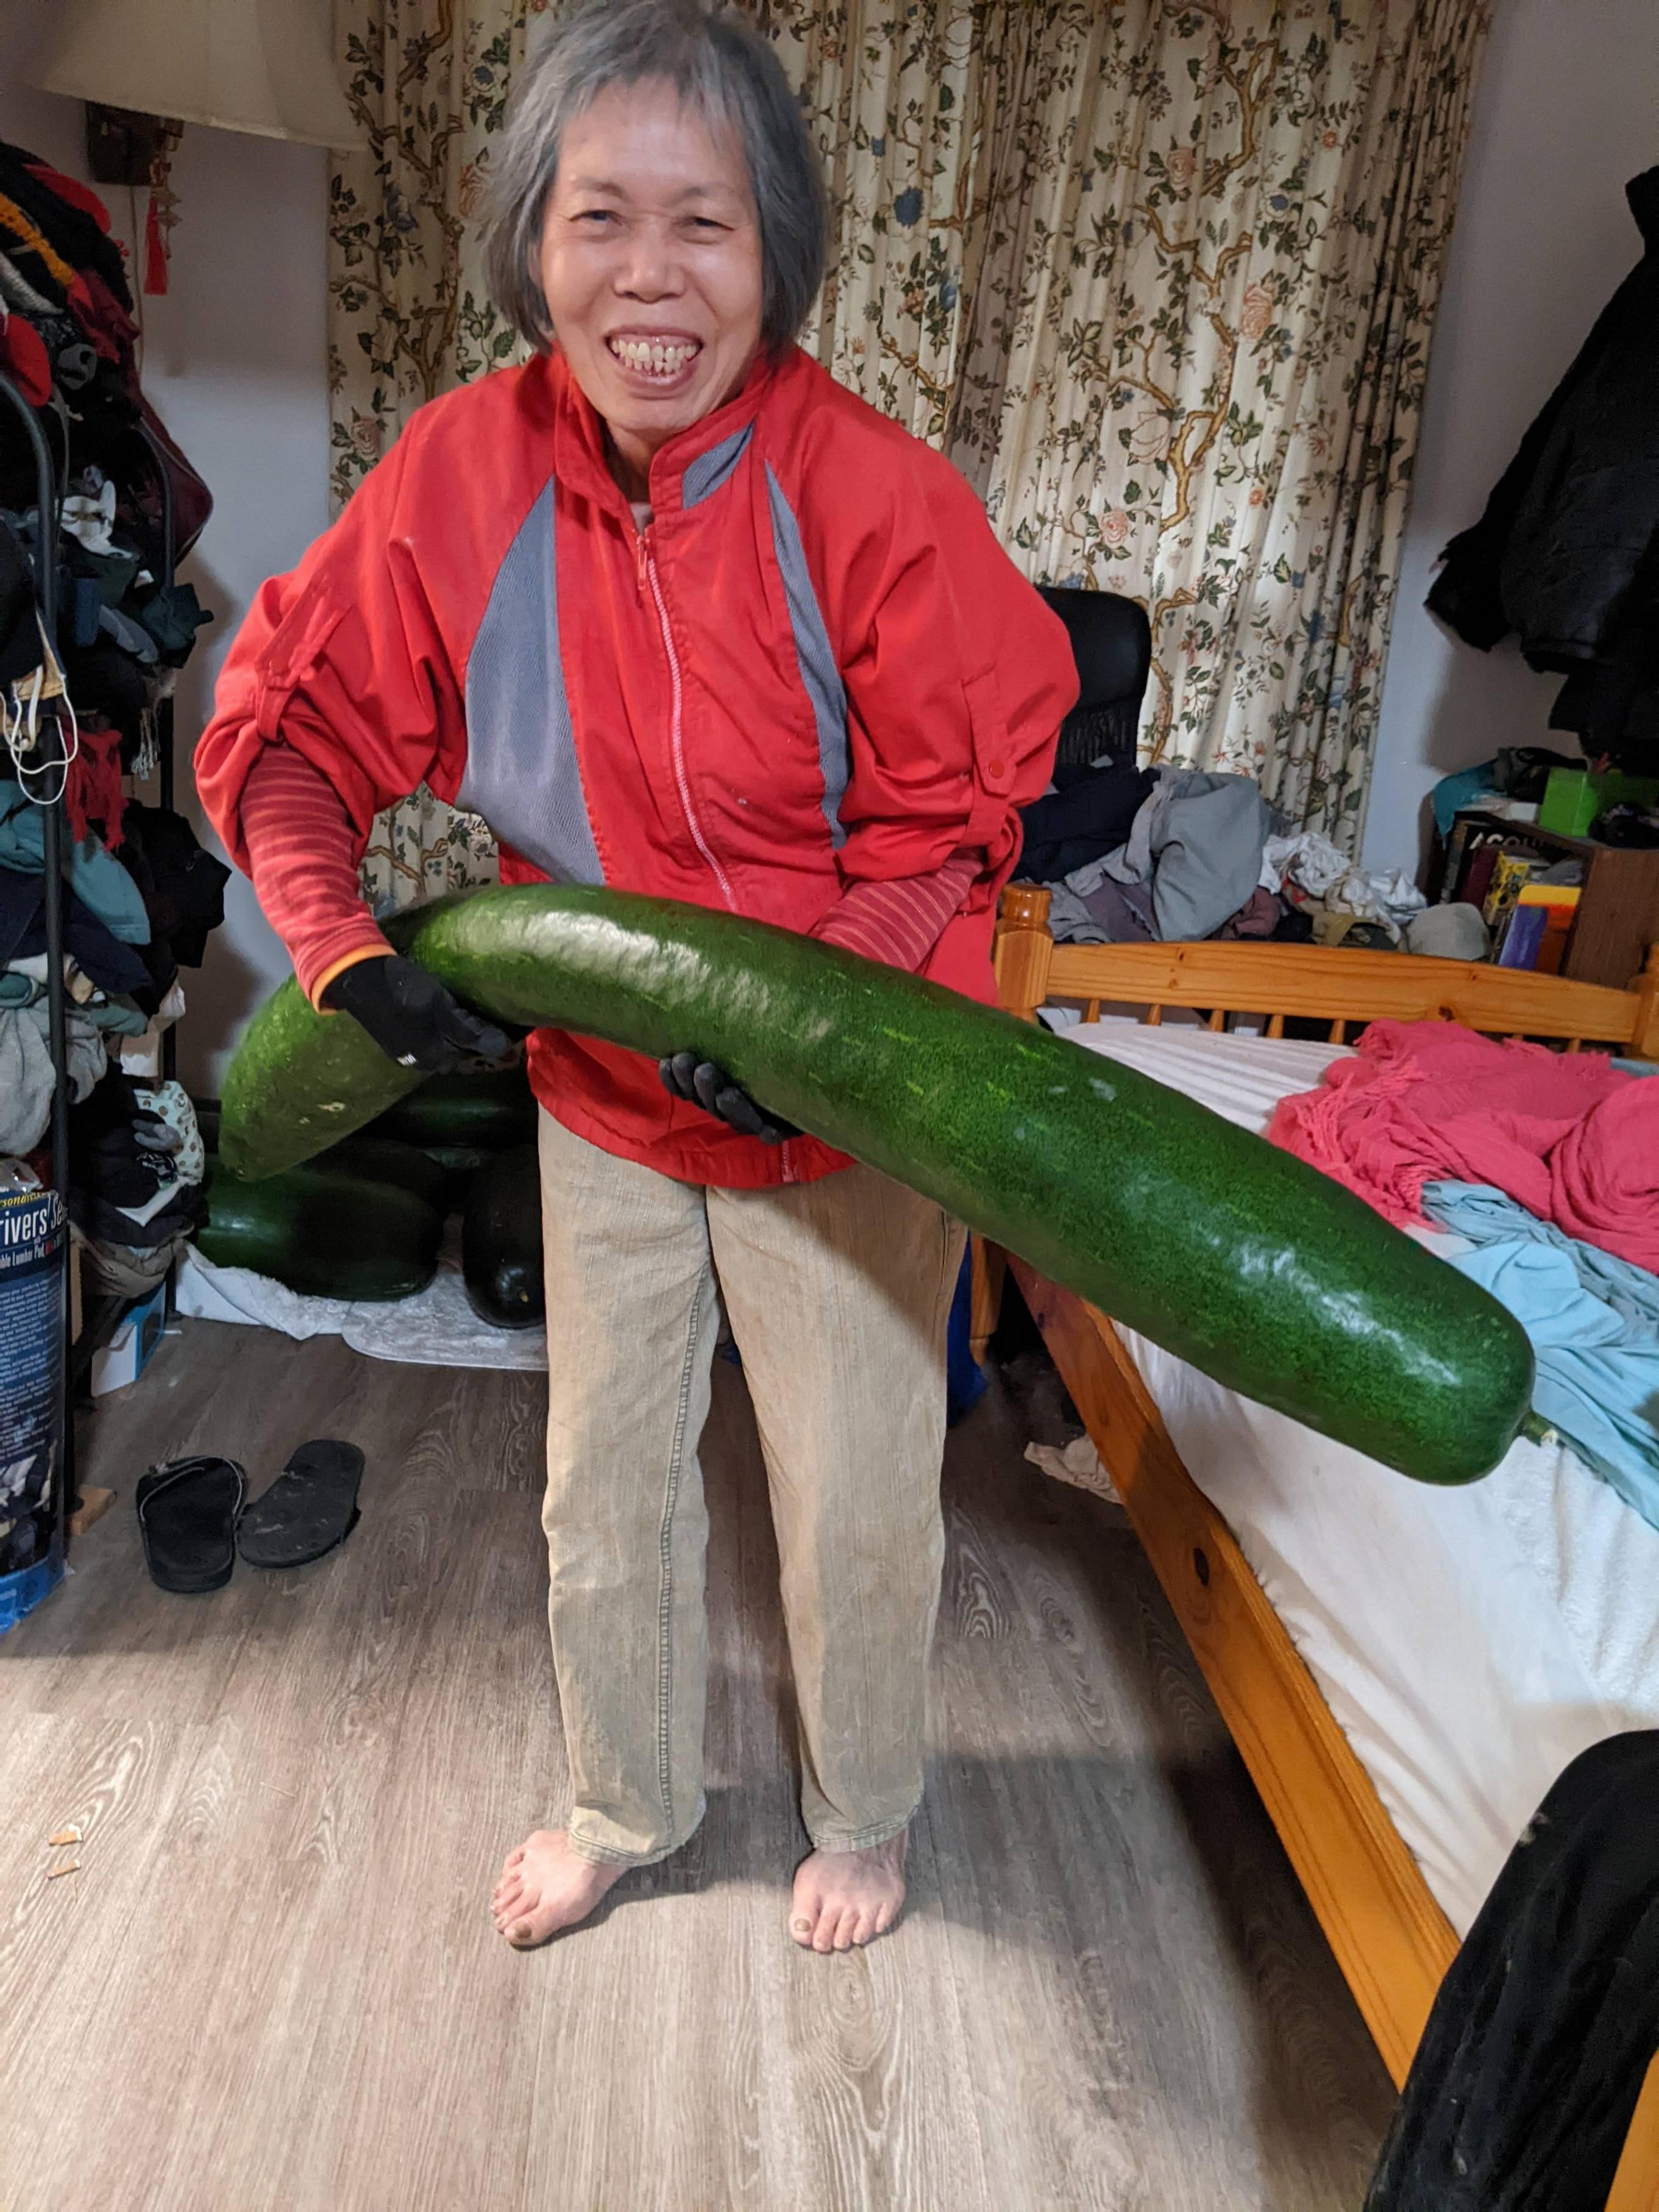 My mom asked if i wanted to see her melon